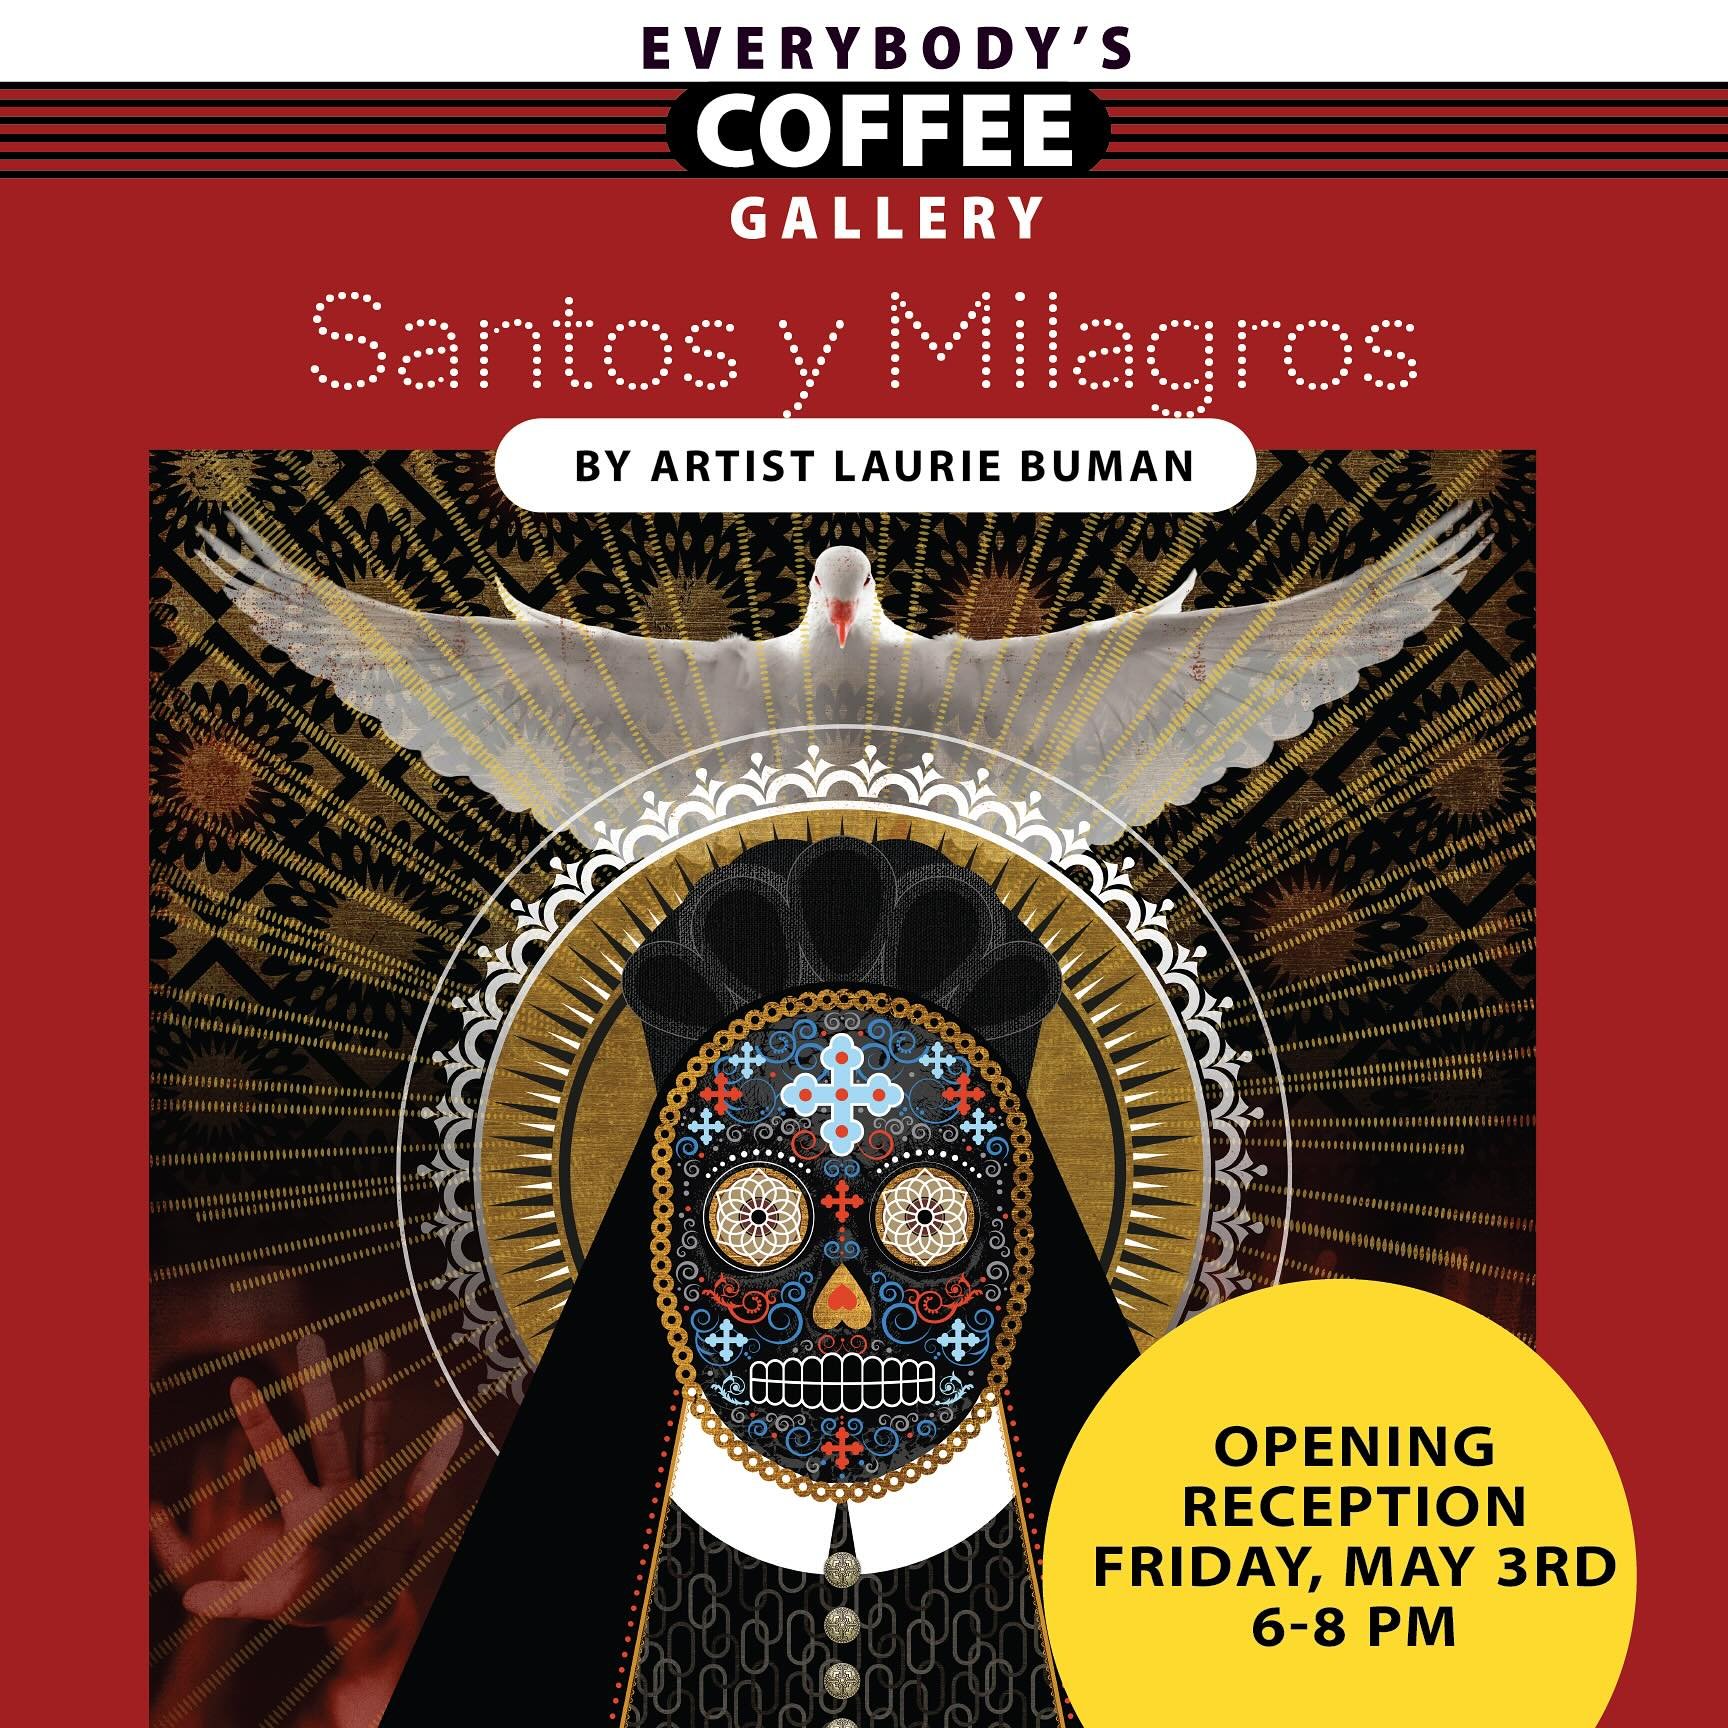 Save the date for my solo show at Everybody&rsquo;s  Gallery. Join me on Friday, May 3rd for the opening reception.
.
.
.
#everybodyscoffee #galleryopening #artforsale #chicago #lauriebuman